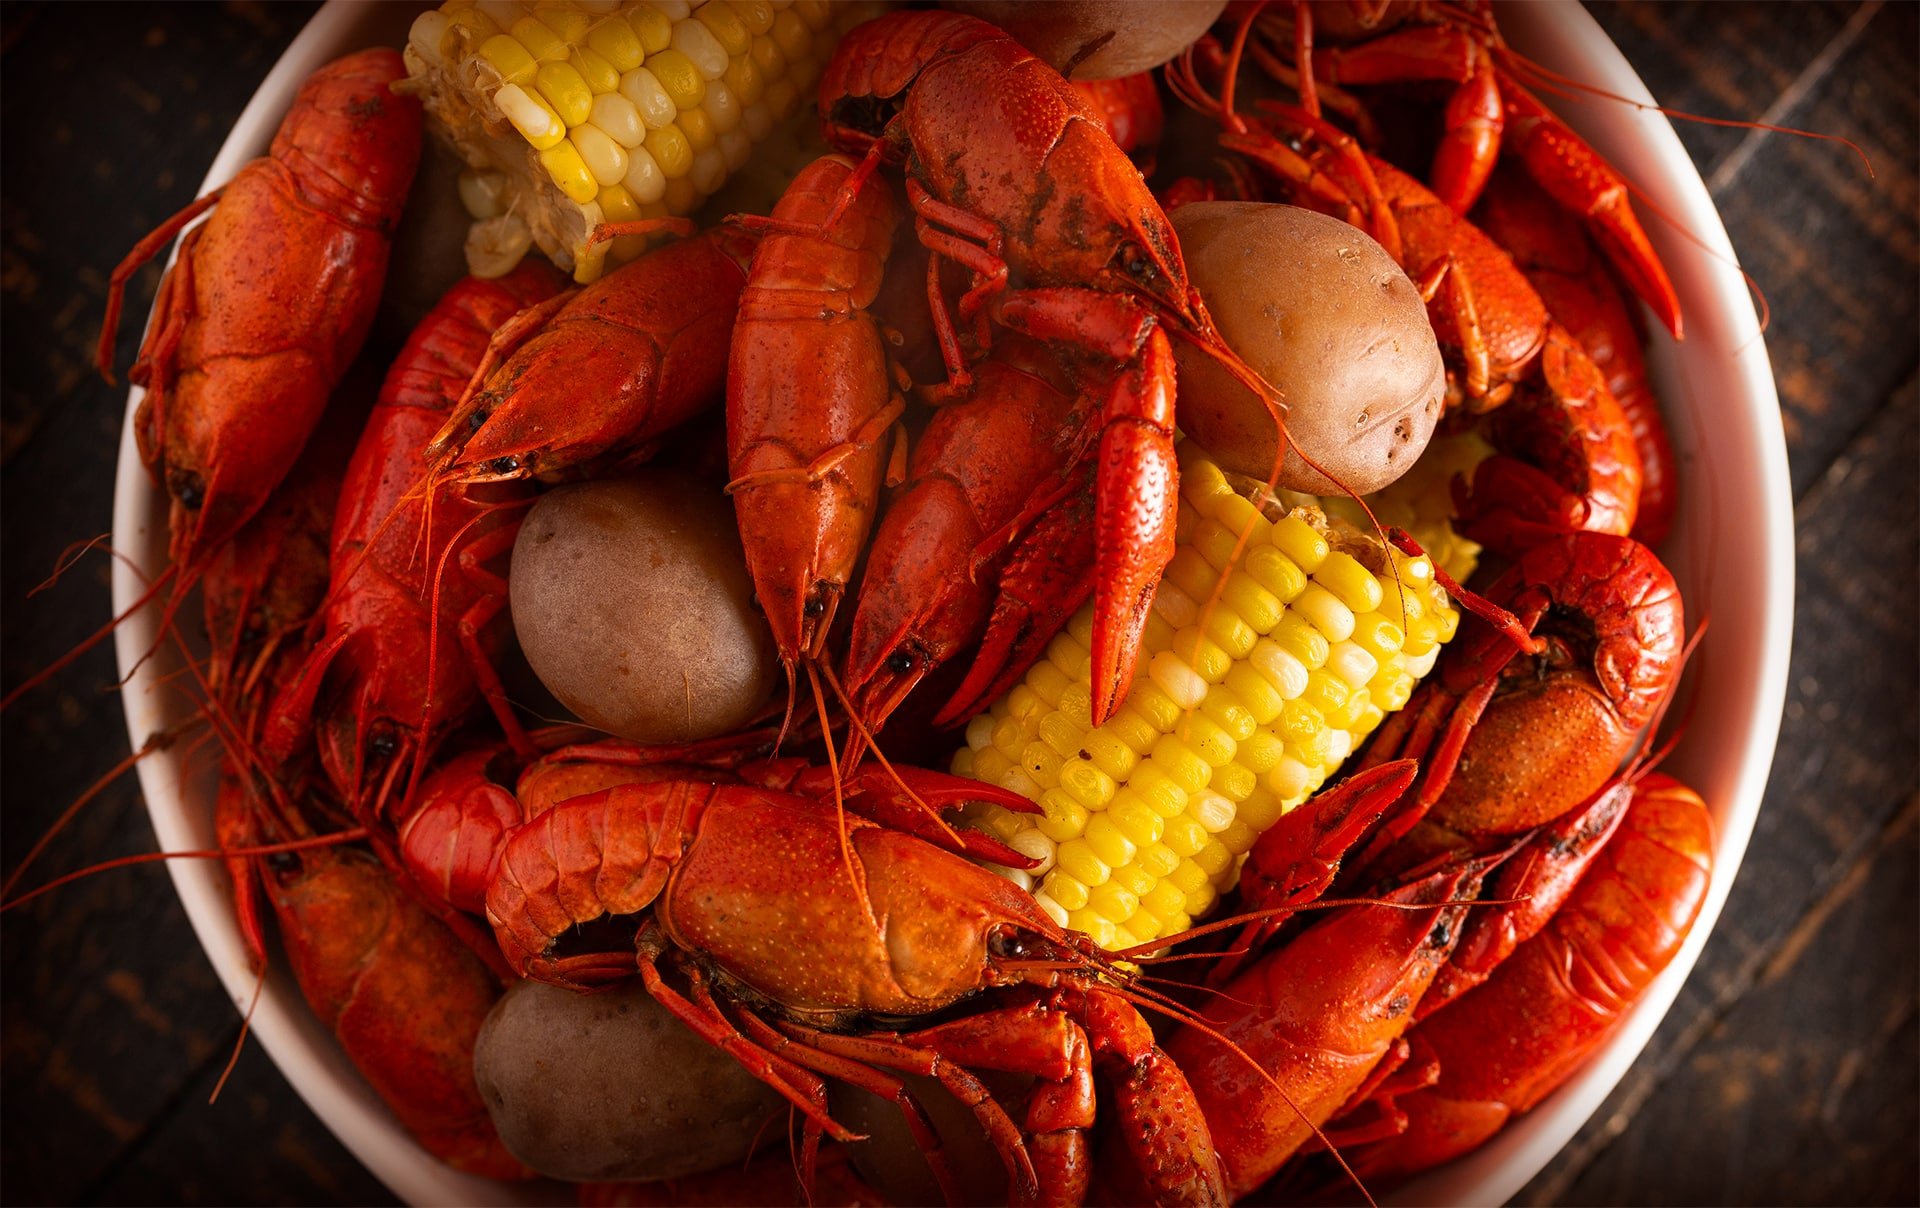 seafood market,seafood restaurant,cajun,cajun menu,fried fish,fish platter,fried oysters,sweet potato fries,softshell crabs,raw oysters,crab,lump crab,jumbo crab,cobia,redfish,salmon,flunder,drum,snapper,trout,flounder